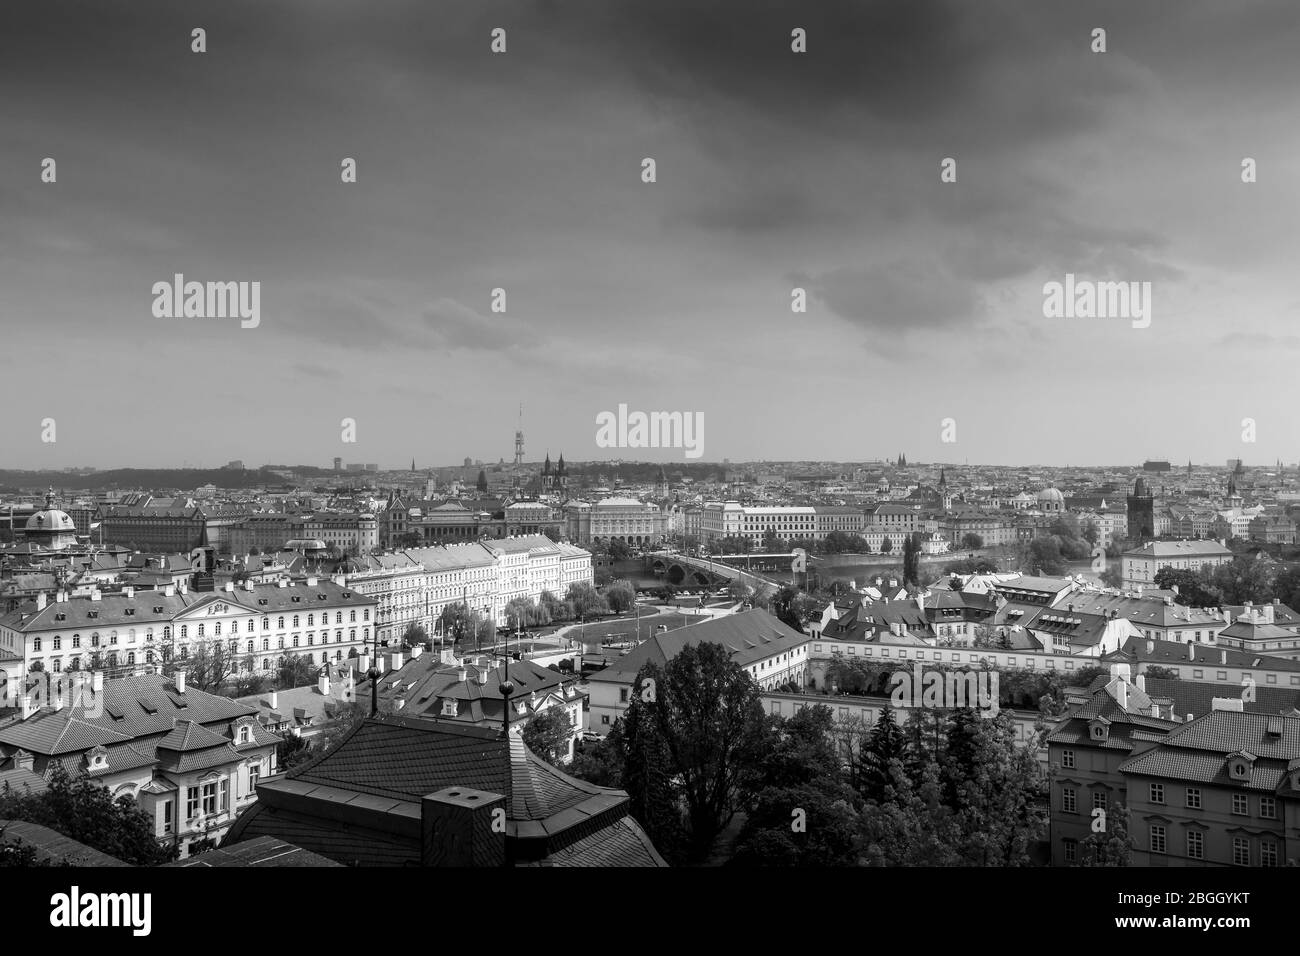 Prague cityscape panorama with red roofs roof. Street top view in a cloudy day. The capital of the Czech Republic. Black and white photo. Monochrome. Stock Photo